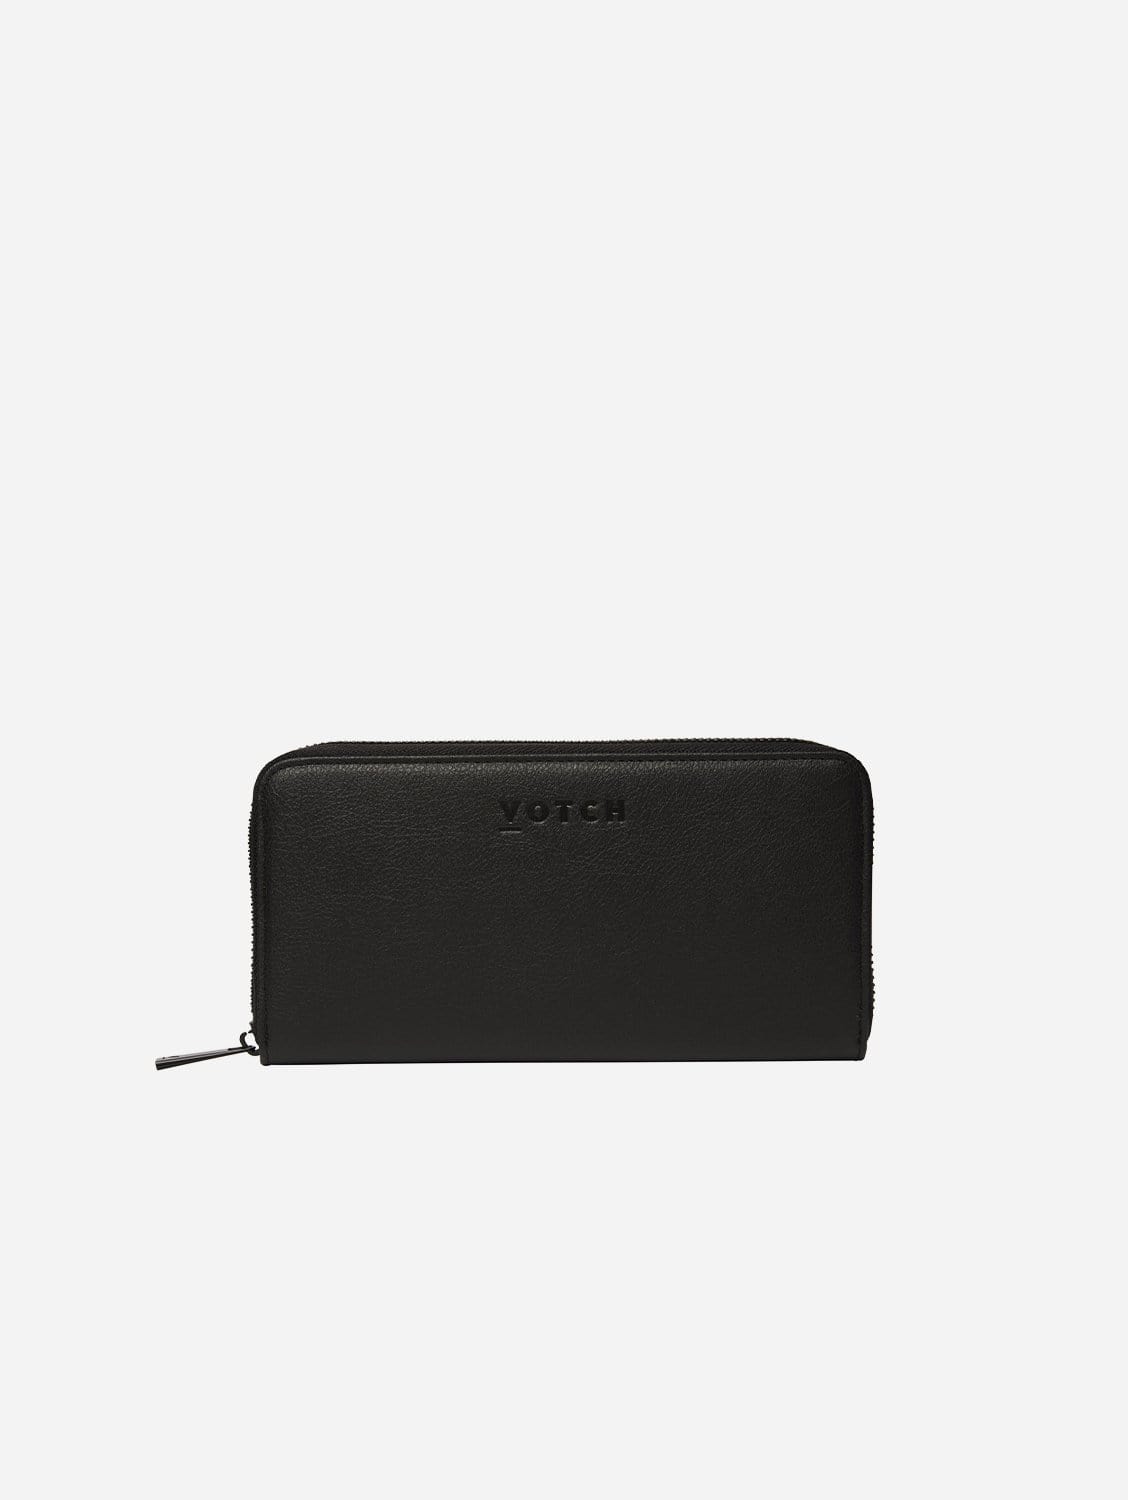 Apple Leather Vegan Bags, Shoes & Accessories – Immaculate Vegan